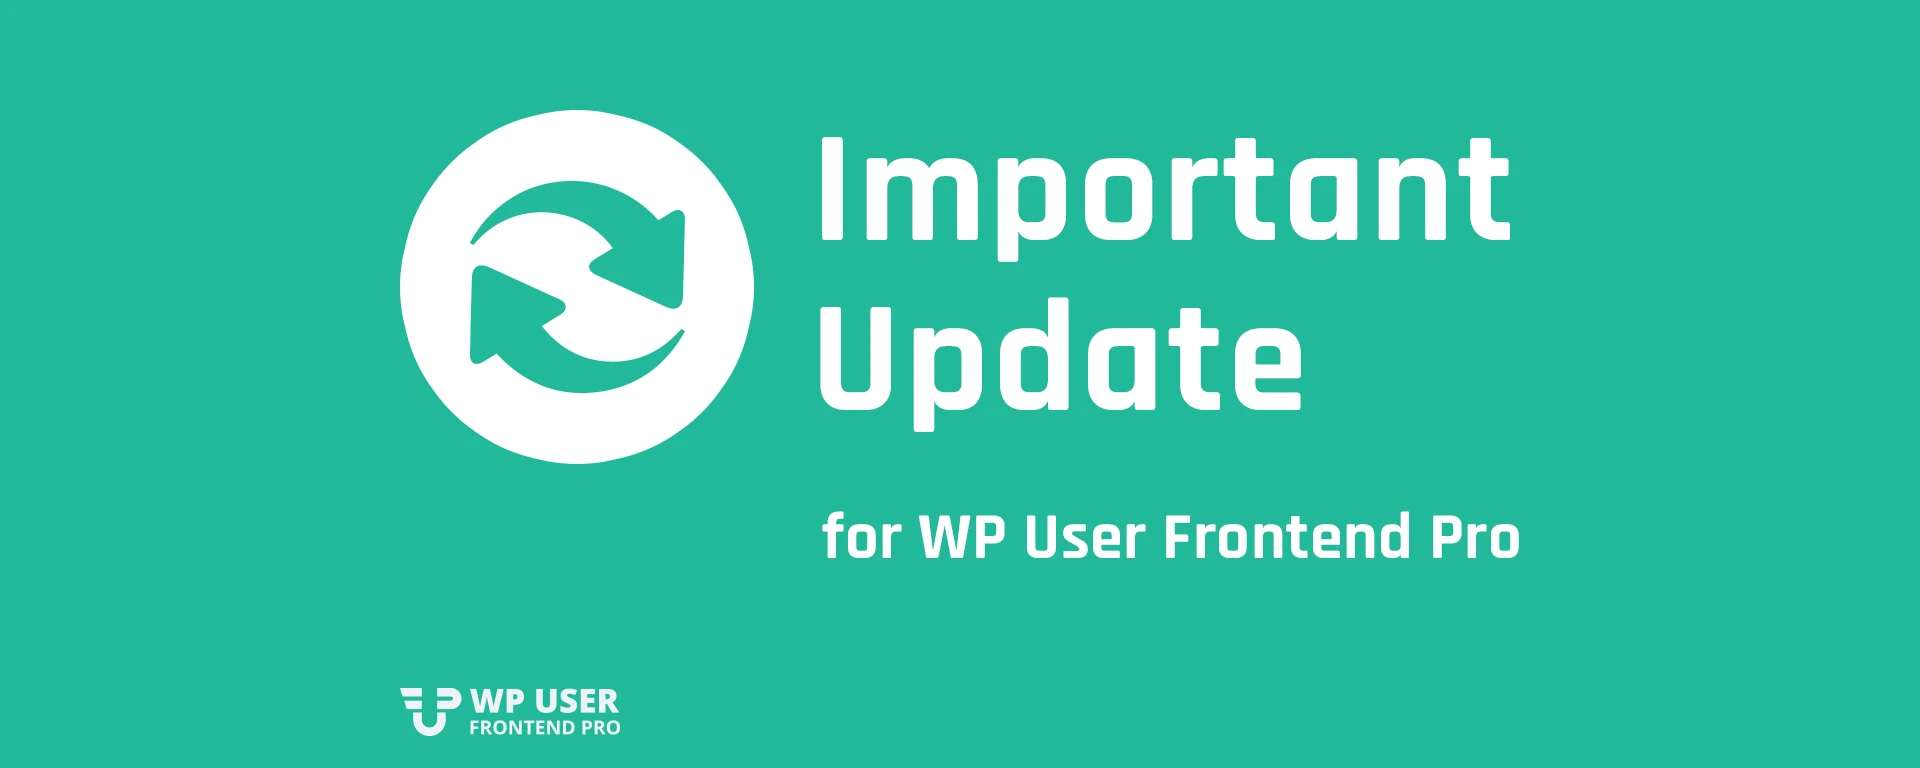 Important Update for WP User Frontend Pro